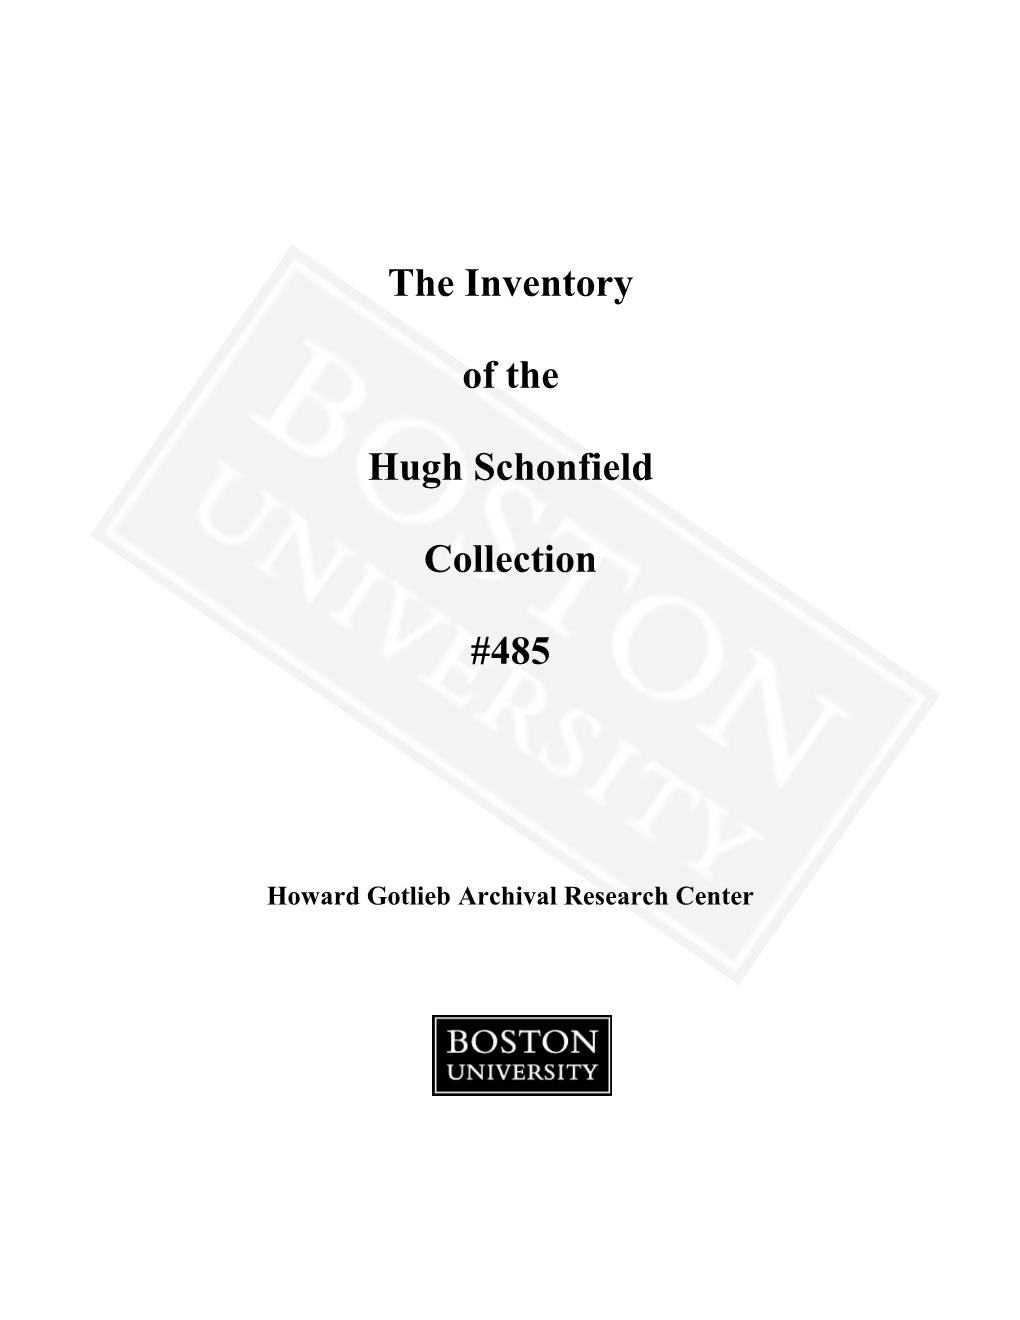 The Inventory of the Hugh Schonfield Collection #485